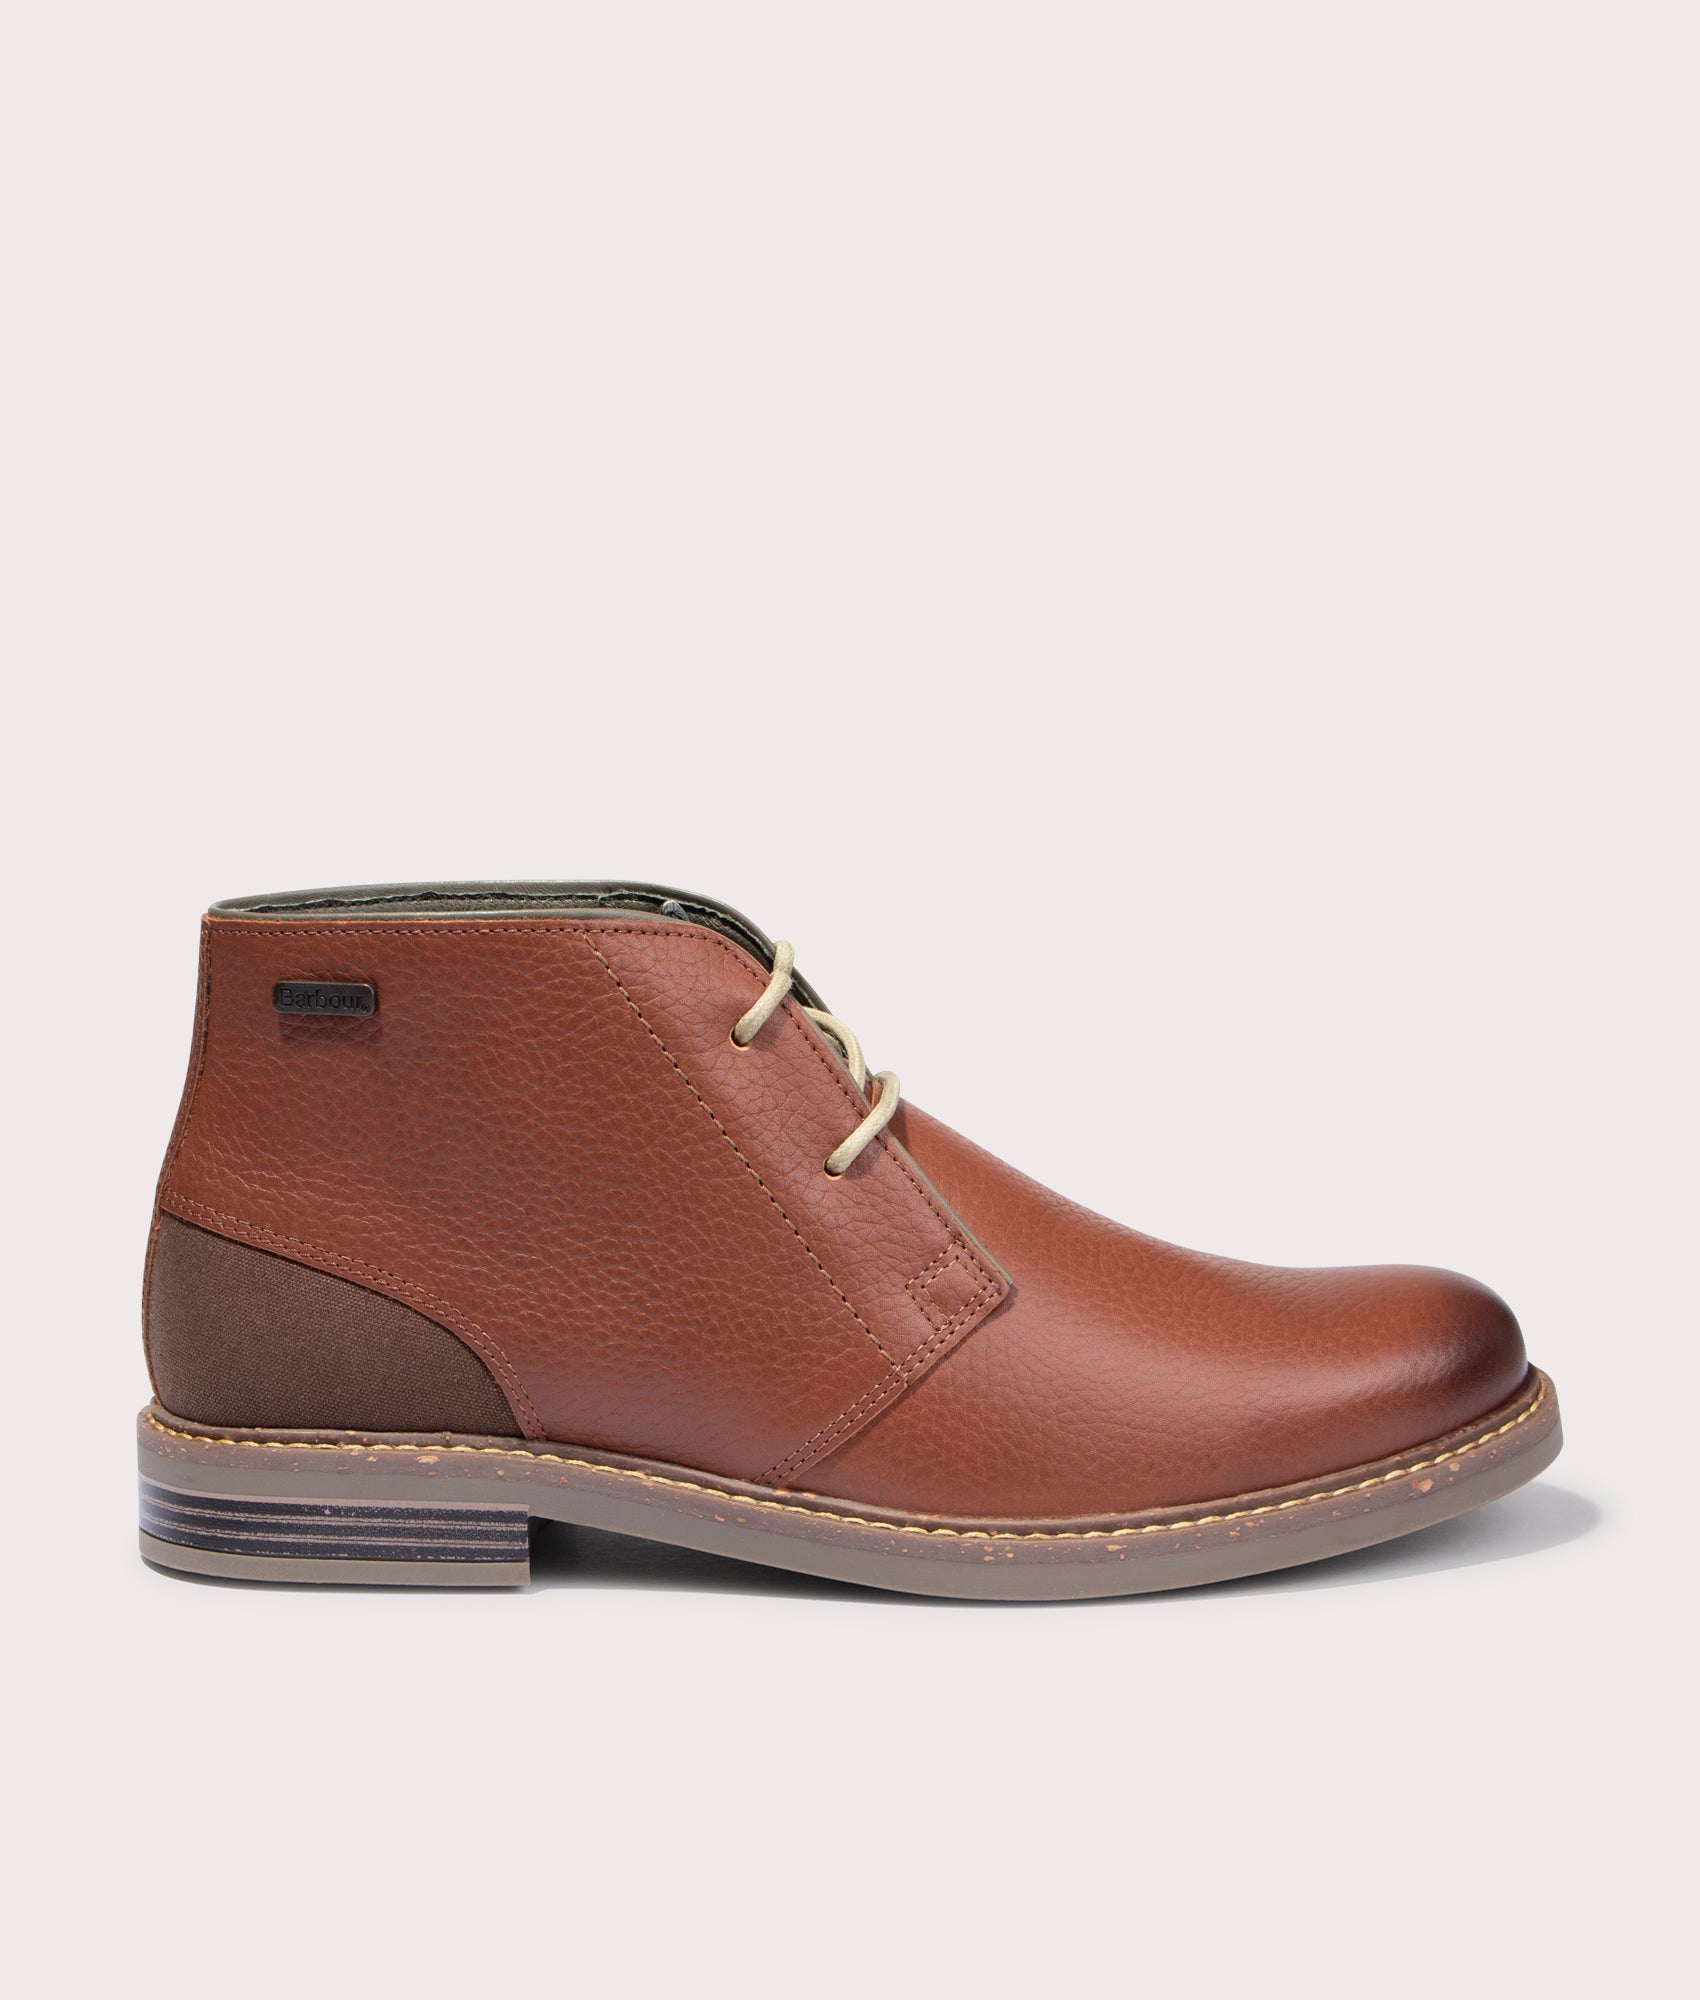 Barbour Lifestyle Mens Readhead Chukka Boots - Colour: TA52 Fawn Suede - Size: 10